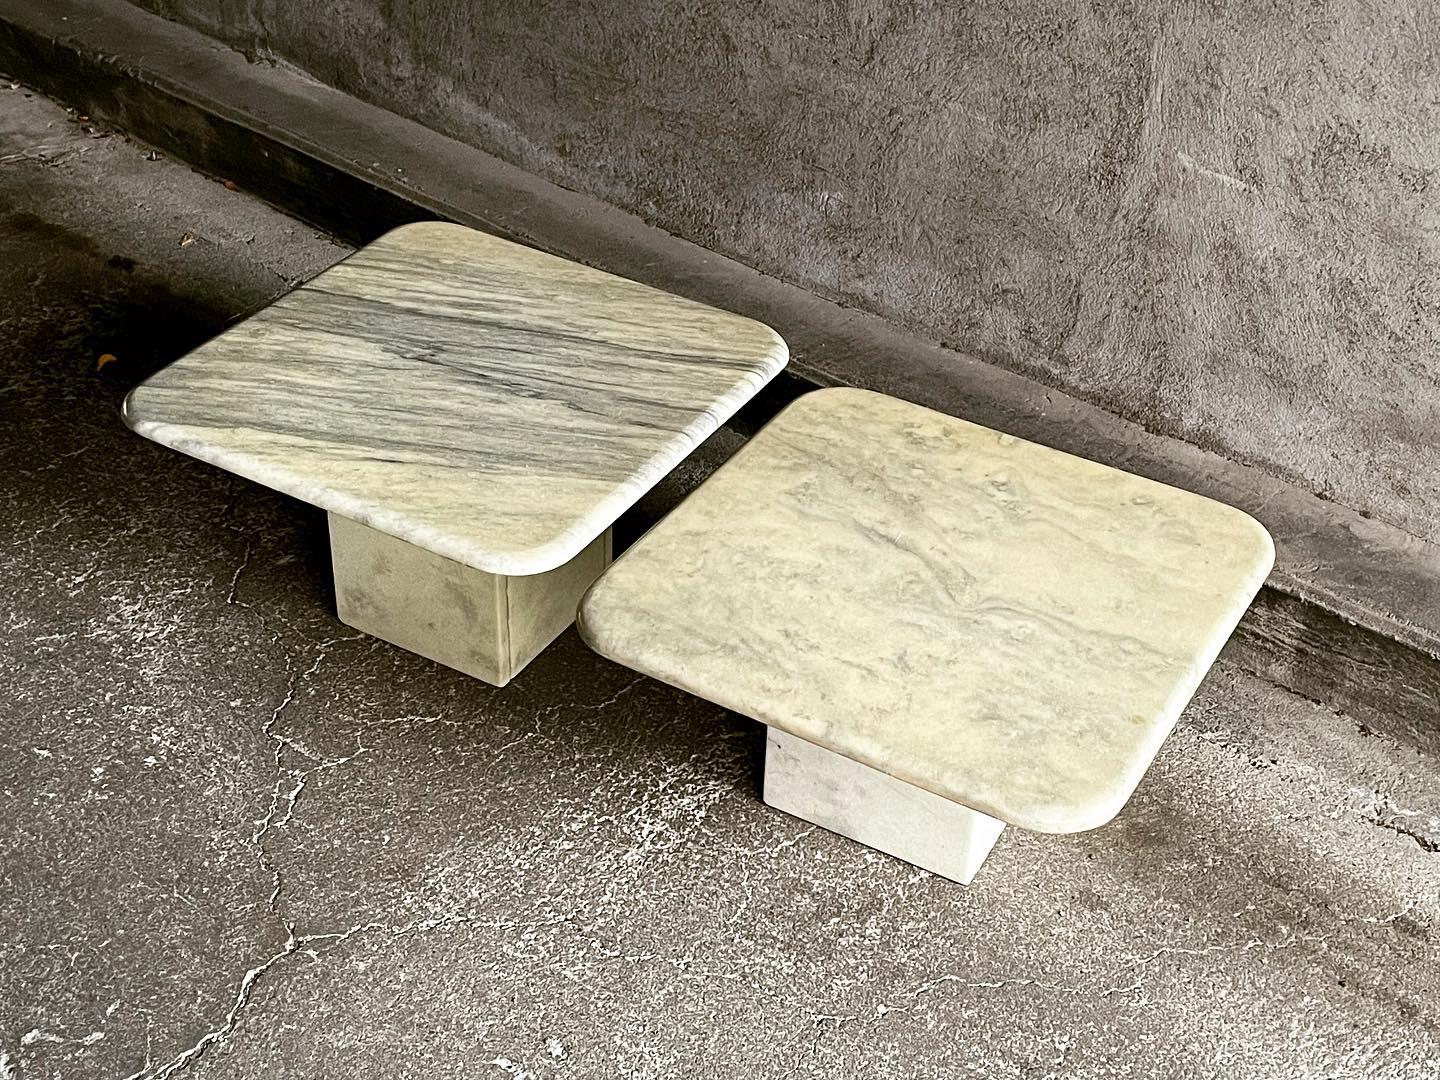 Pair of nesting marble coffee tables from the 1960s. Removable square tops with rare traces of use. Nice marble veining. These coffee tables will bring an undeniable charm to your living room.
Dimensions:
Table 1: W60 x D60 x H35 cm
Table 2: W60